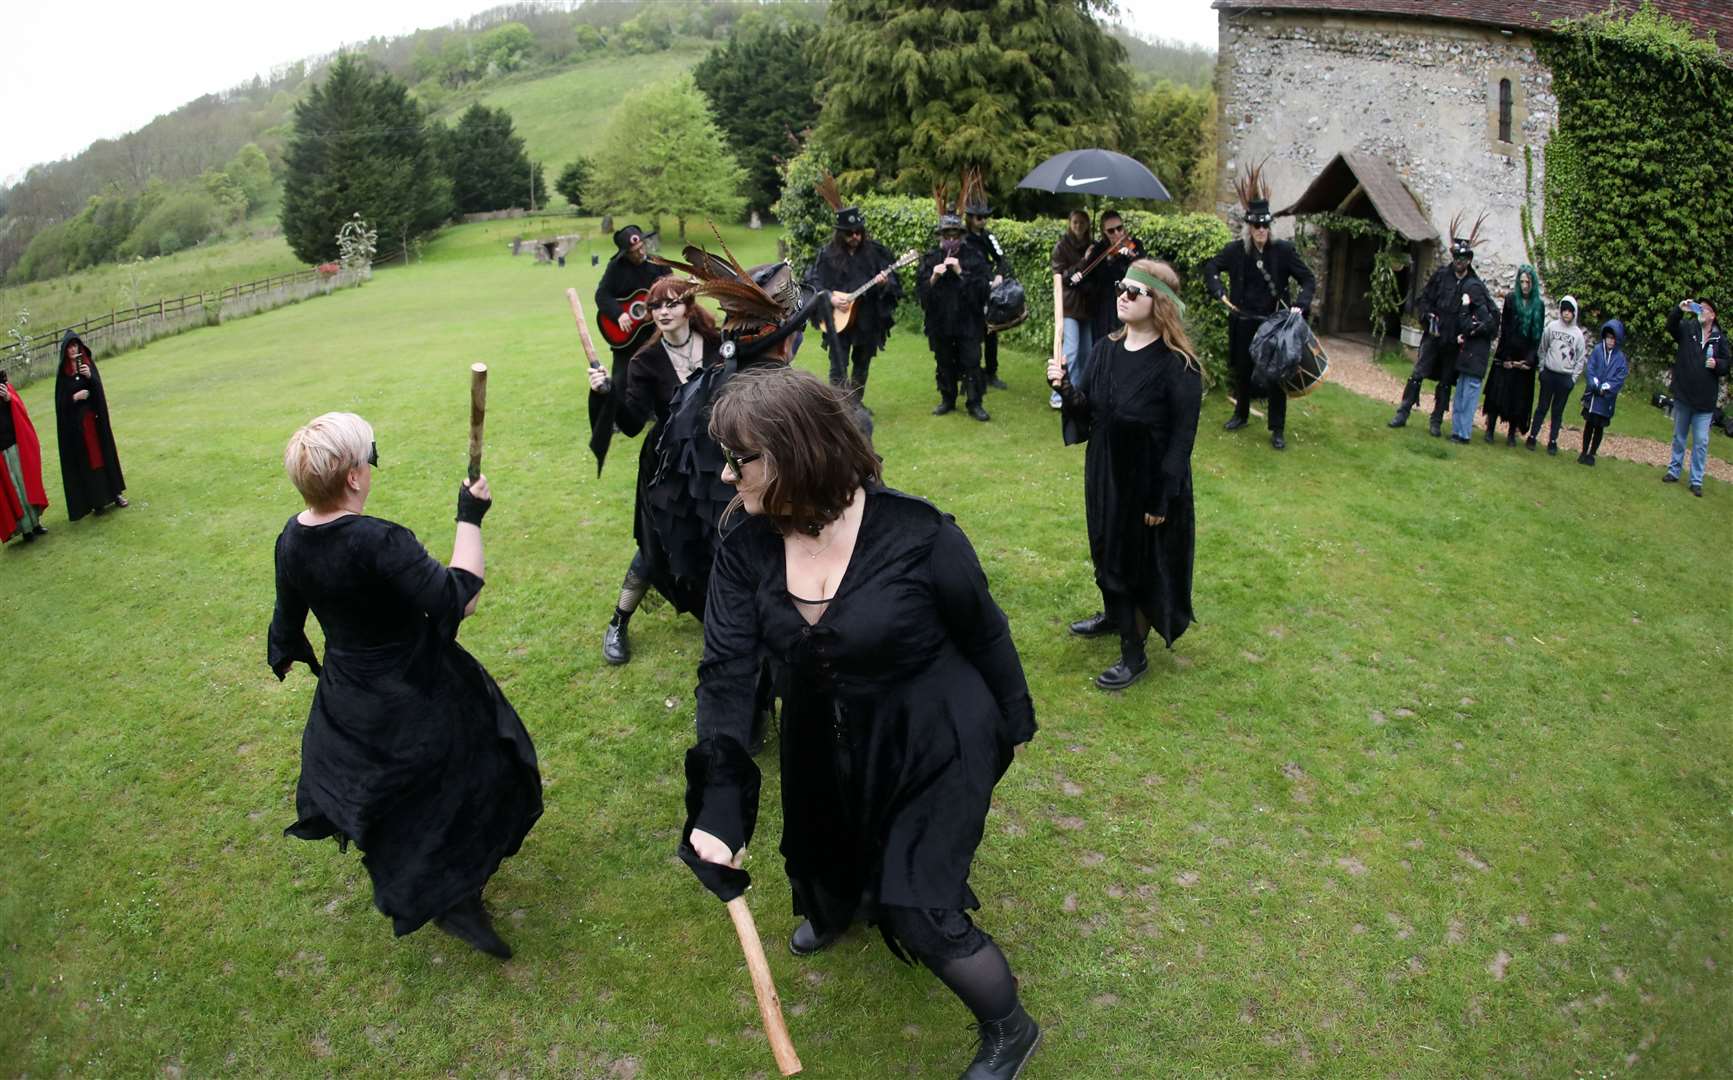 Beltane celebrations are taking place in Dode near Luddesdown